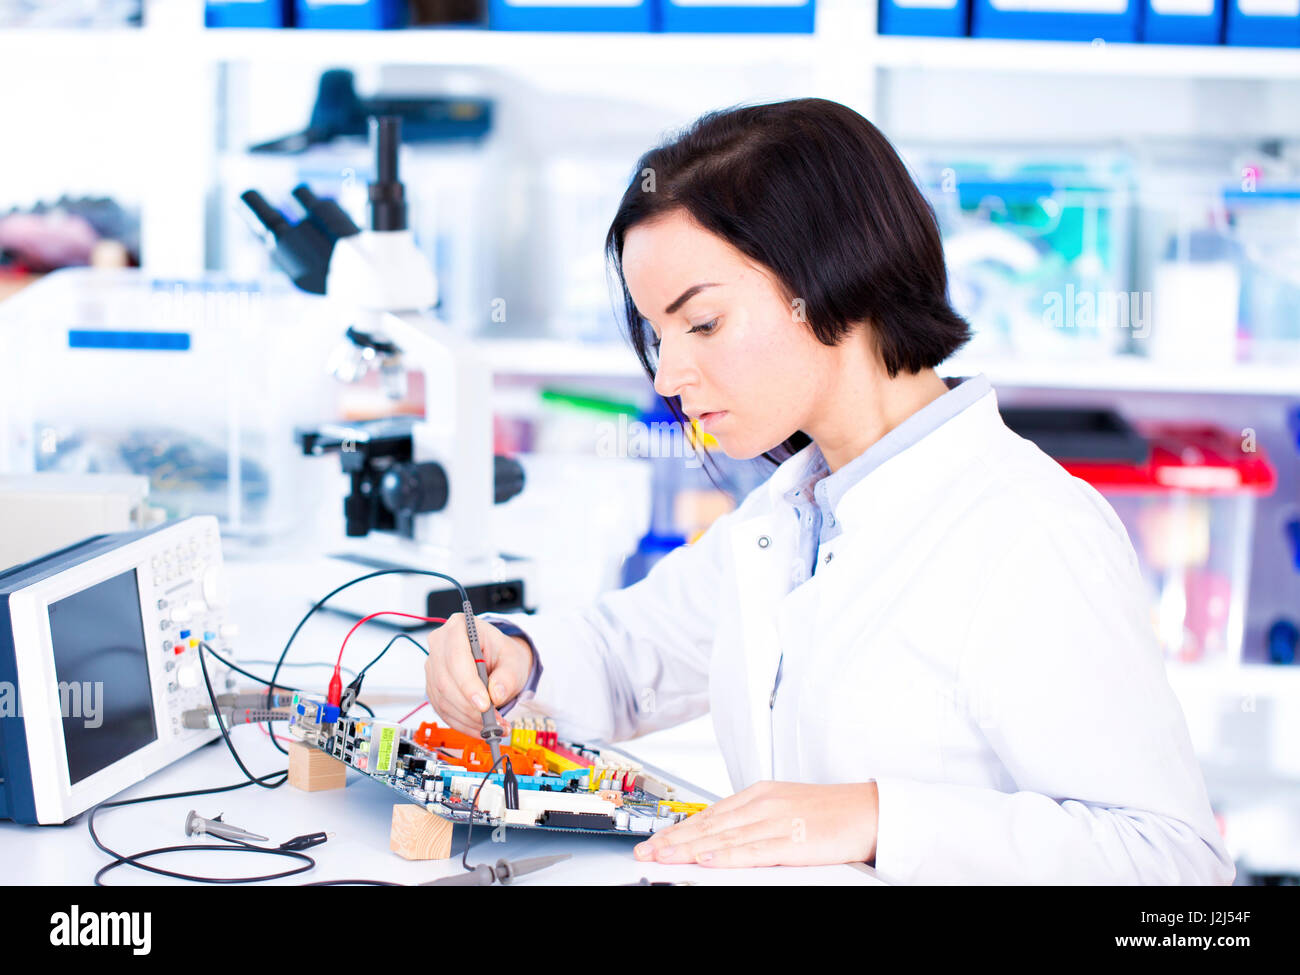 Female engineer soldering a circuit board. Stock Photo